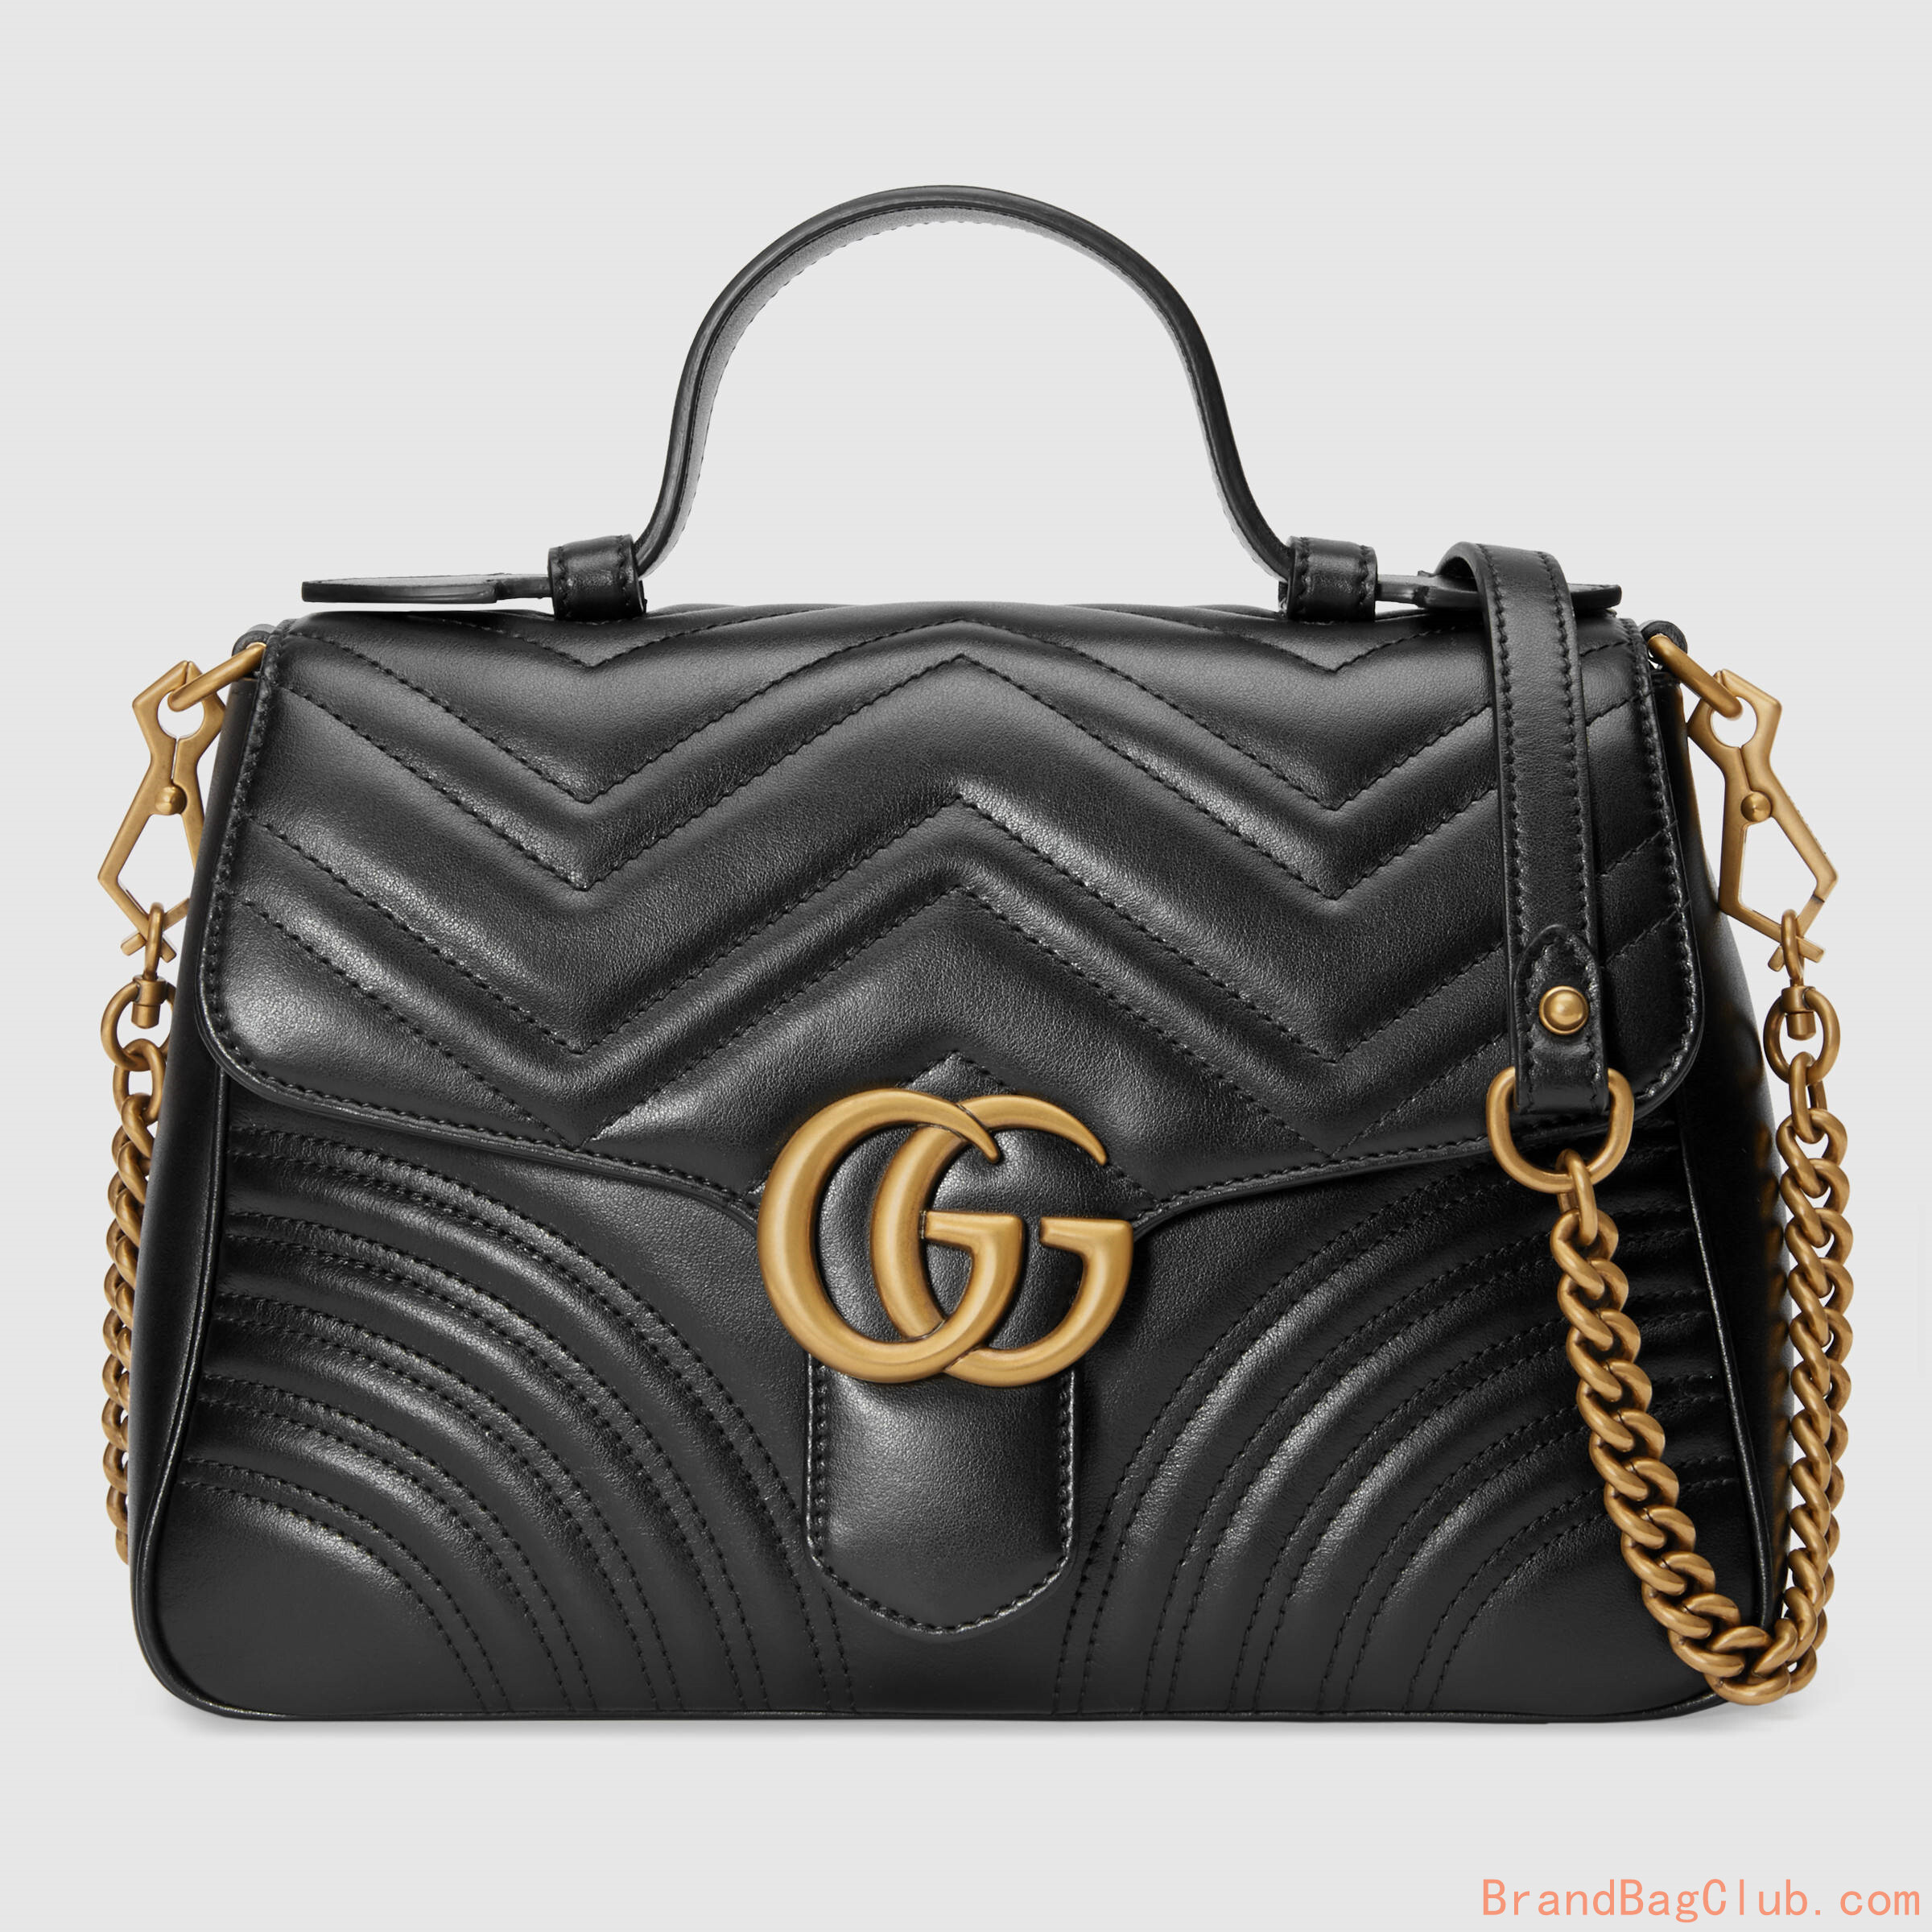 Gucci GG Marmont gucci ladies handbags leather small top handle bag 498110 black sale